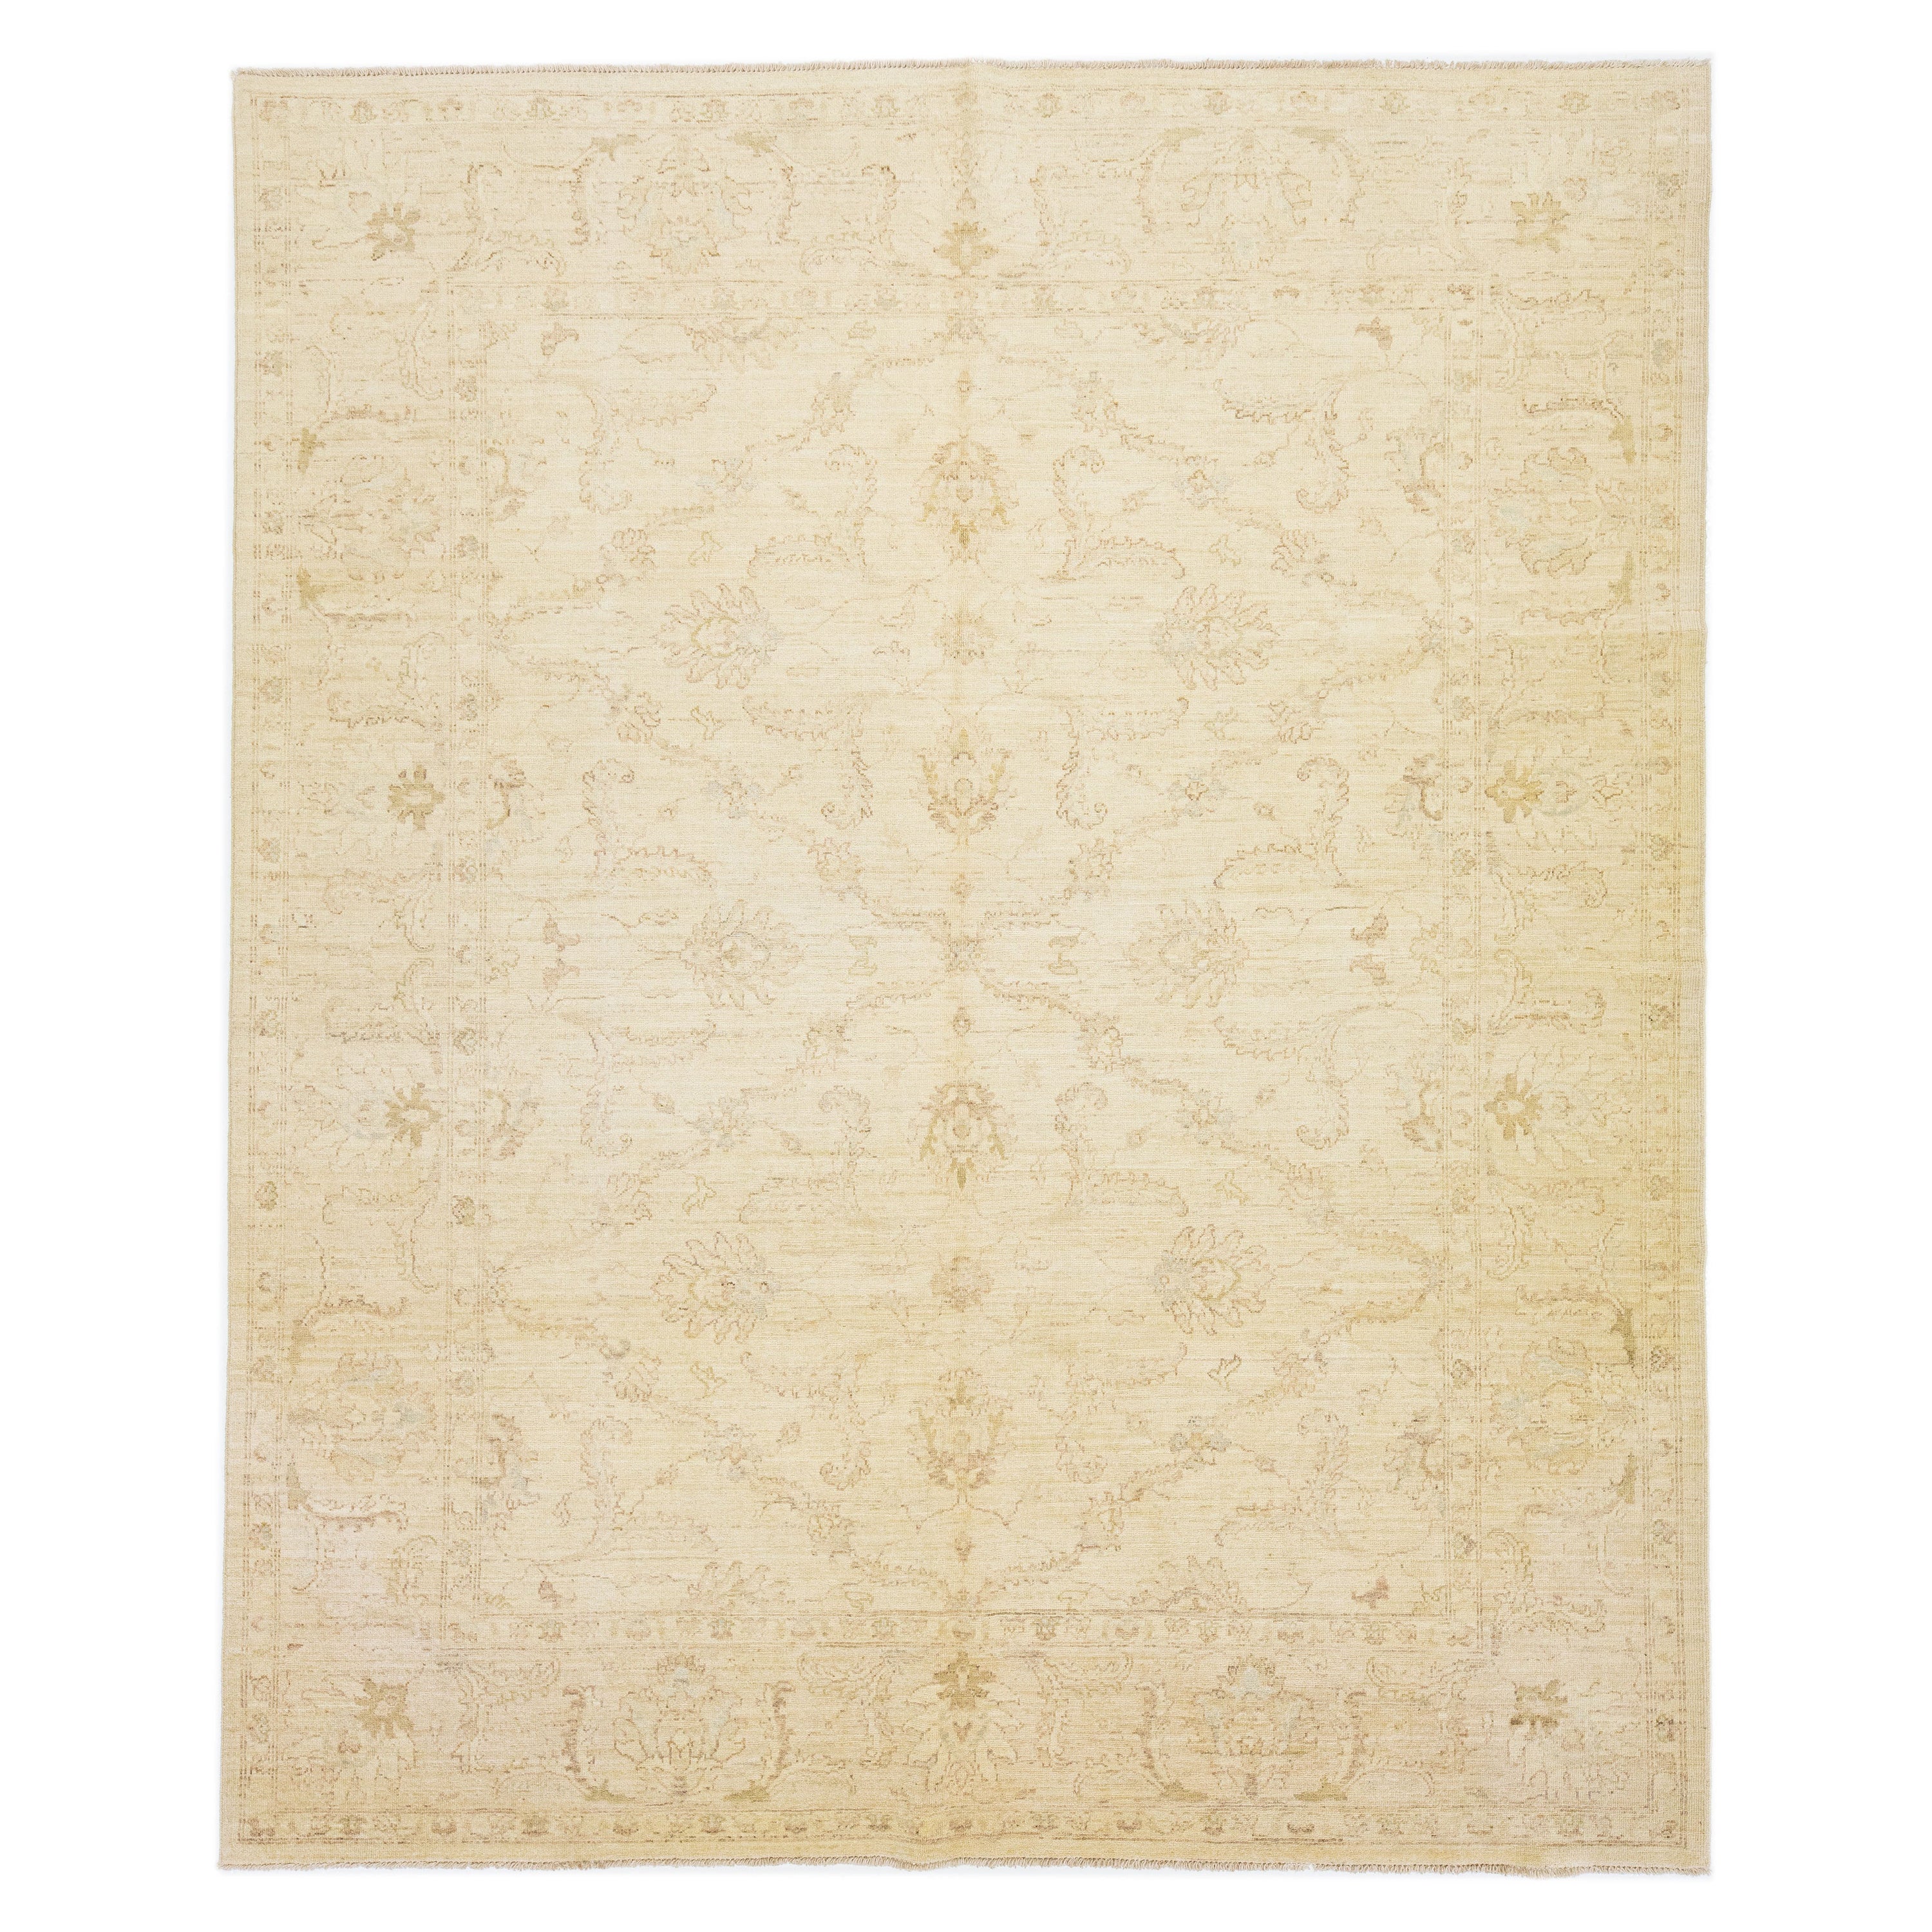 Room Size Modern Khotan Style Wool Rug with Floral Pattern in Beige